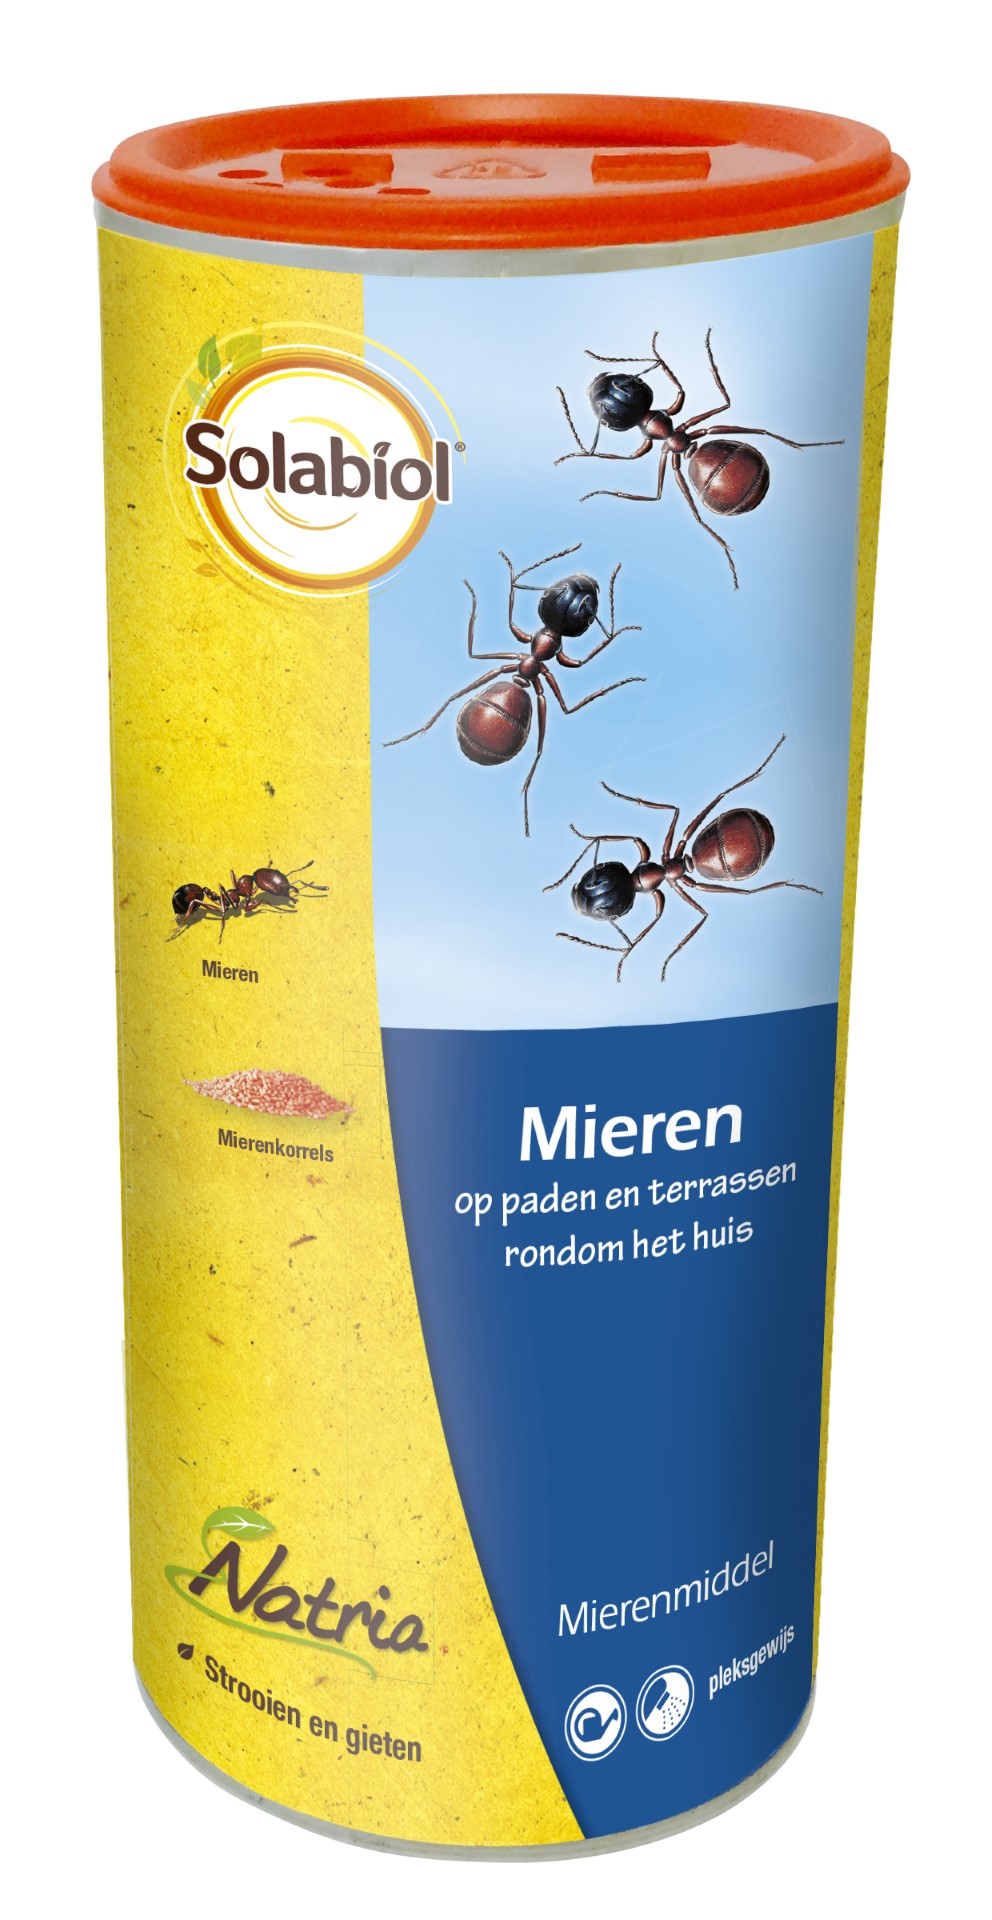 Mierenmiddel 400g SBM Protect